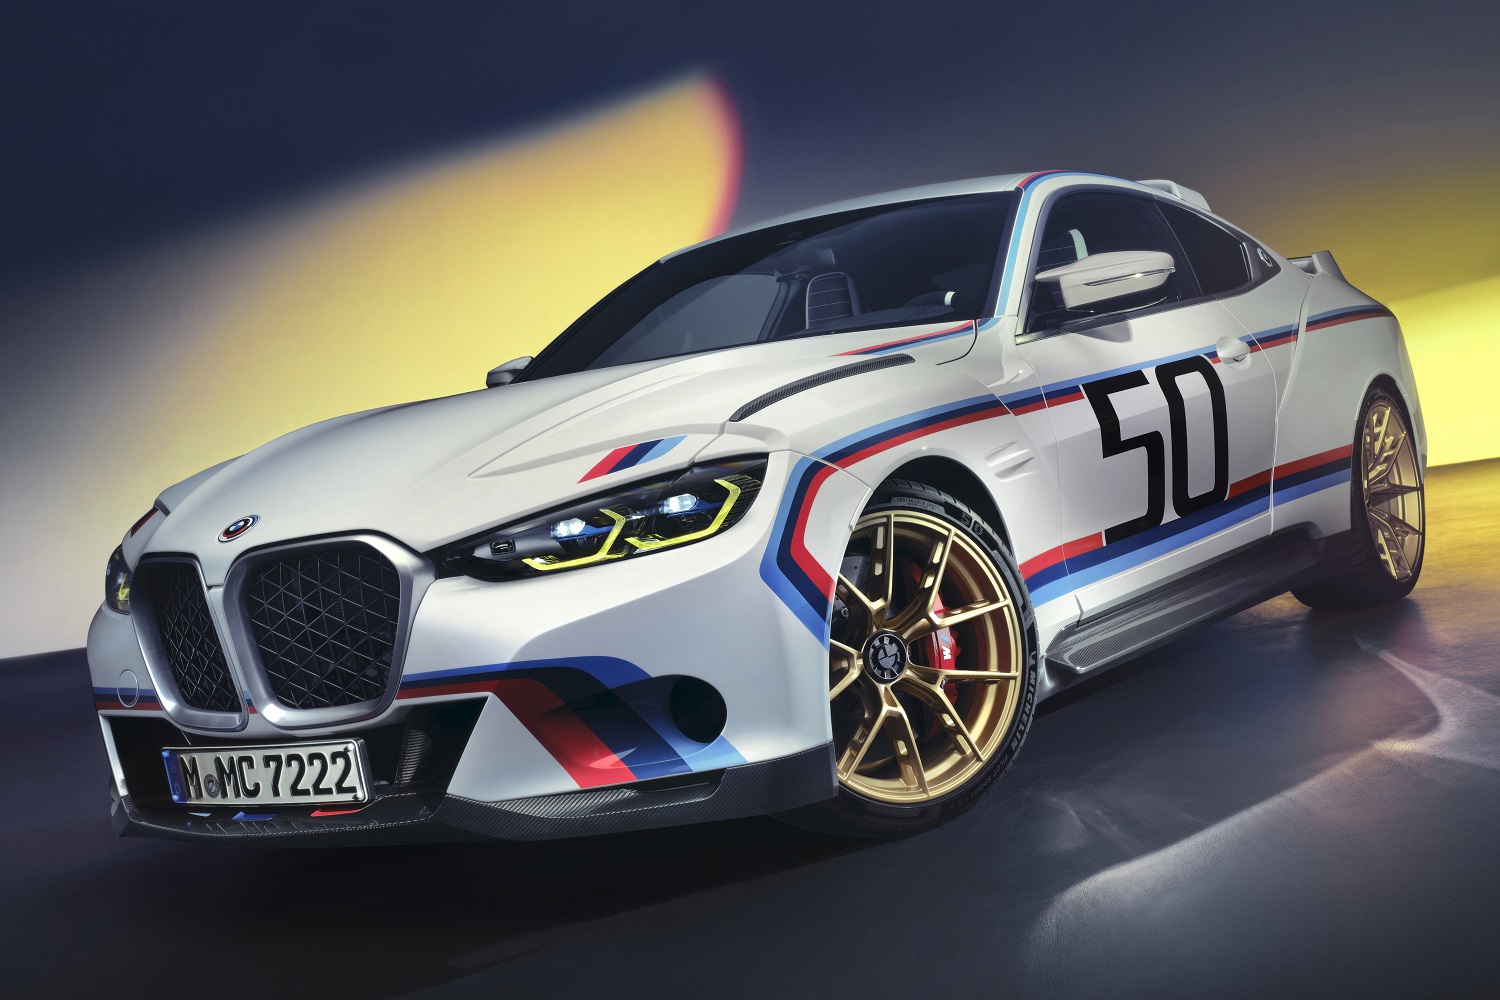 BMW 3.0 CSL is a lightweight and very rare homage to an icon. Image by BMW.